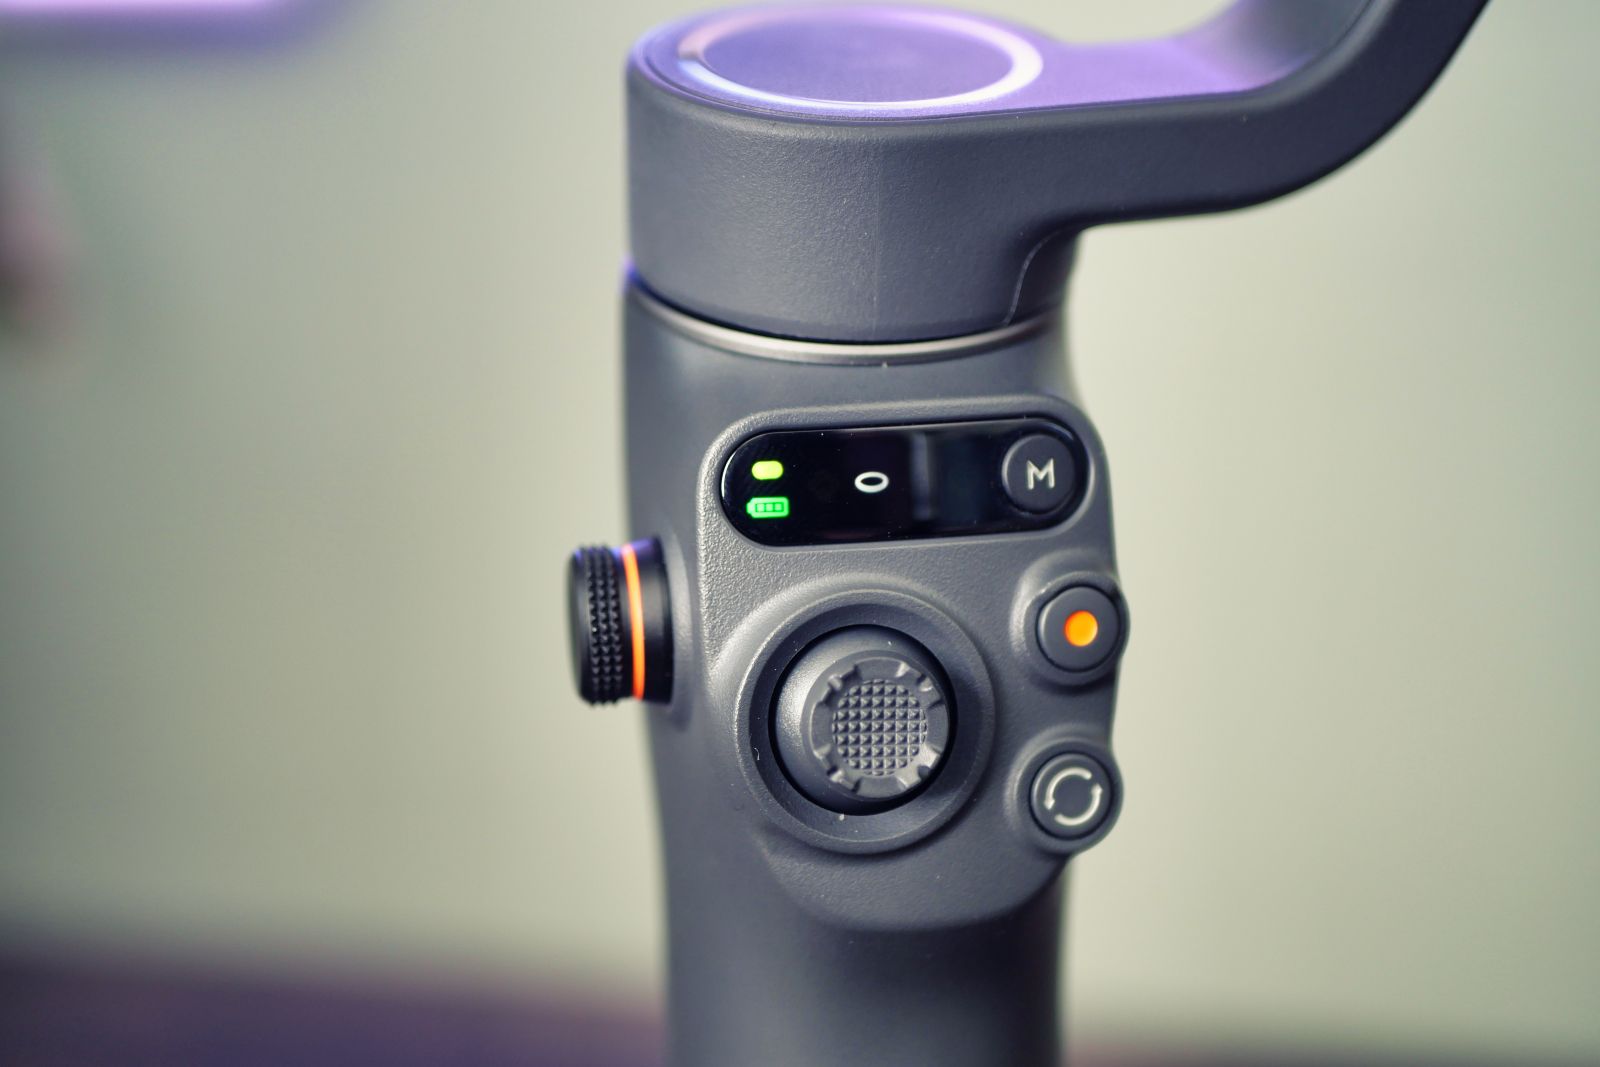 DJI Osmo Mobile 6 Review - A Great Smartphone Gimbal 